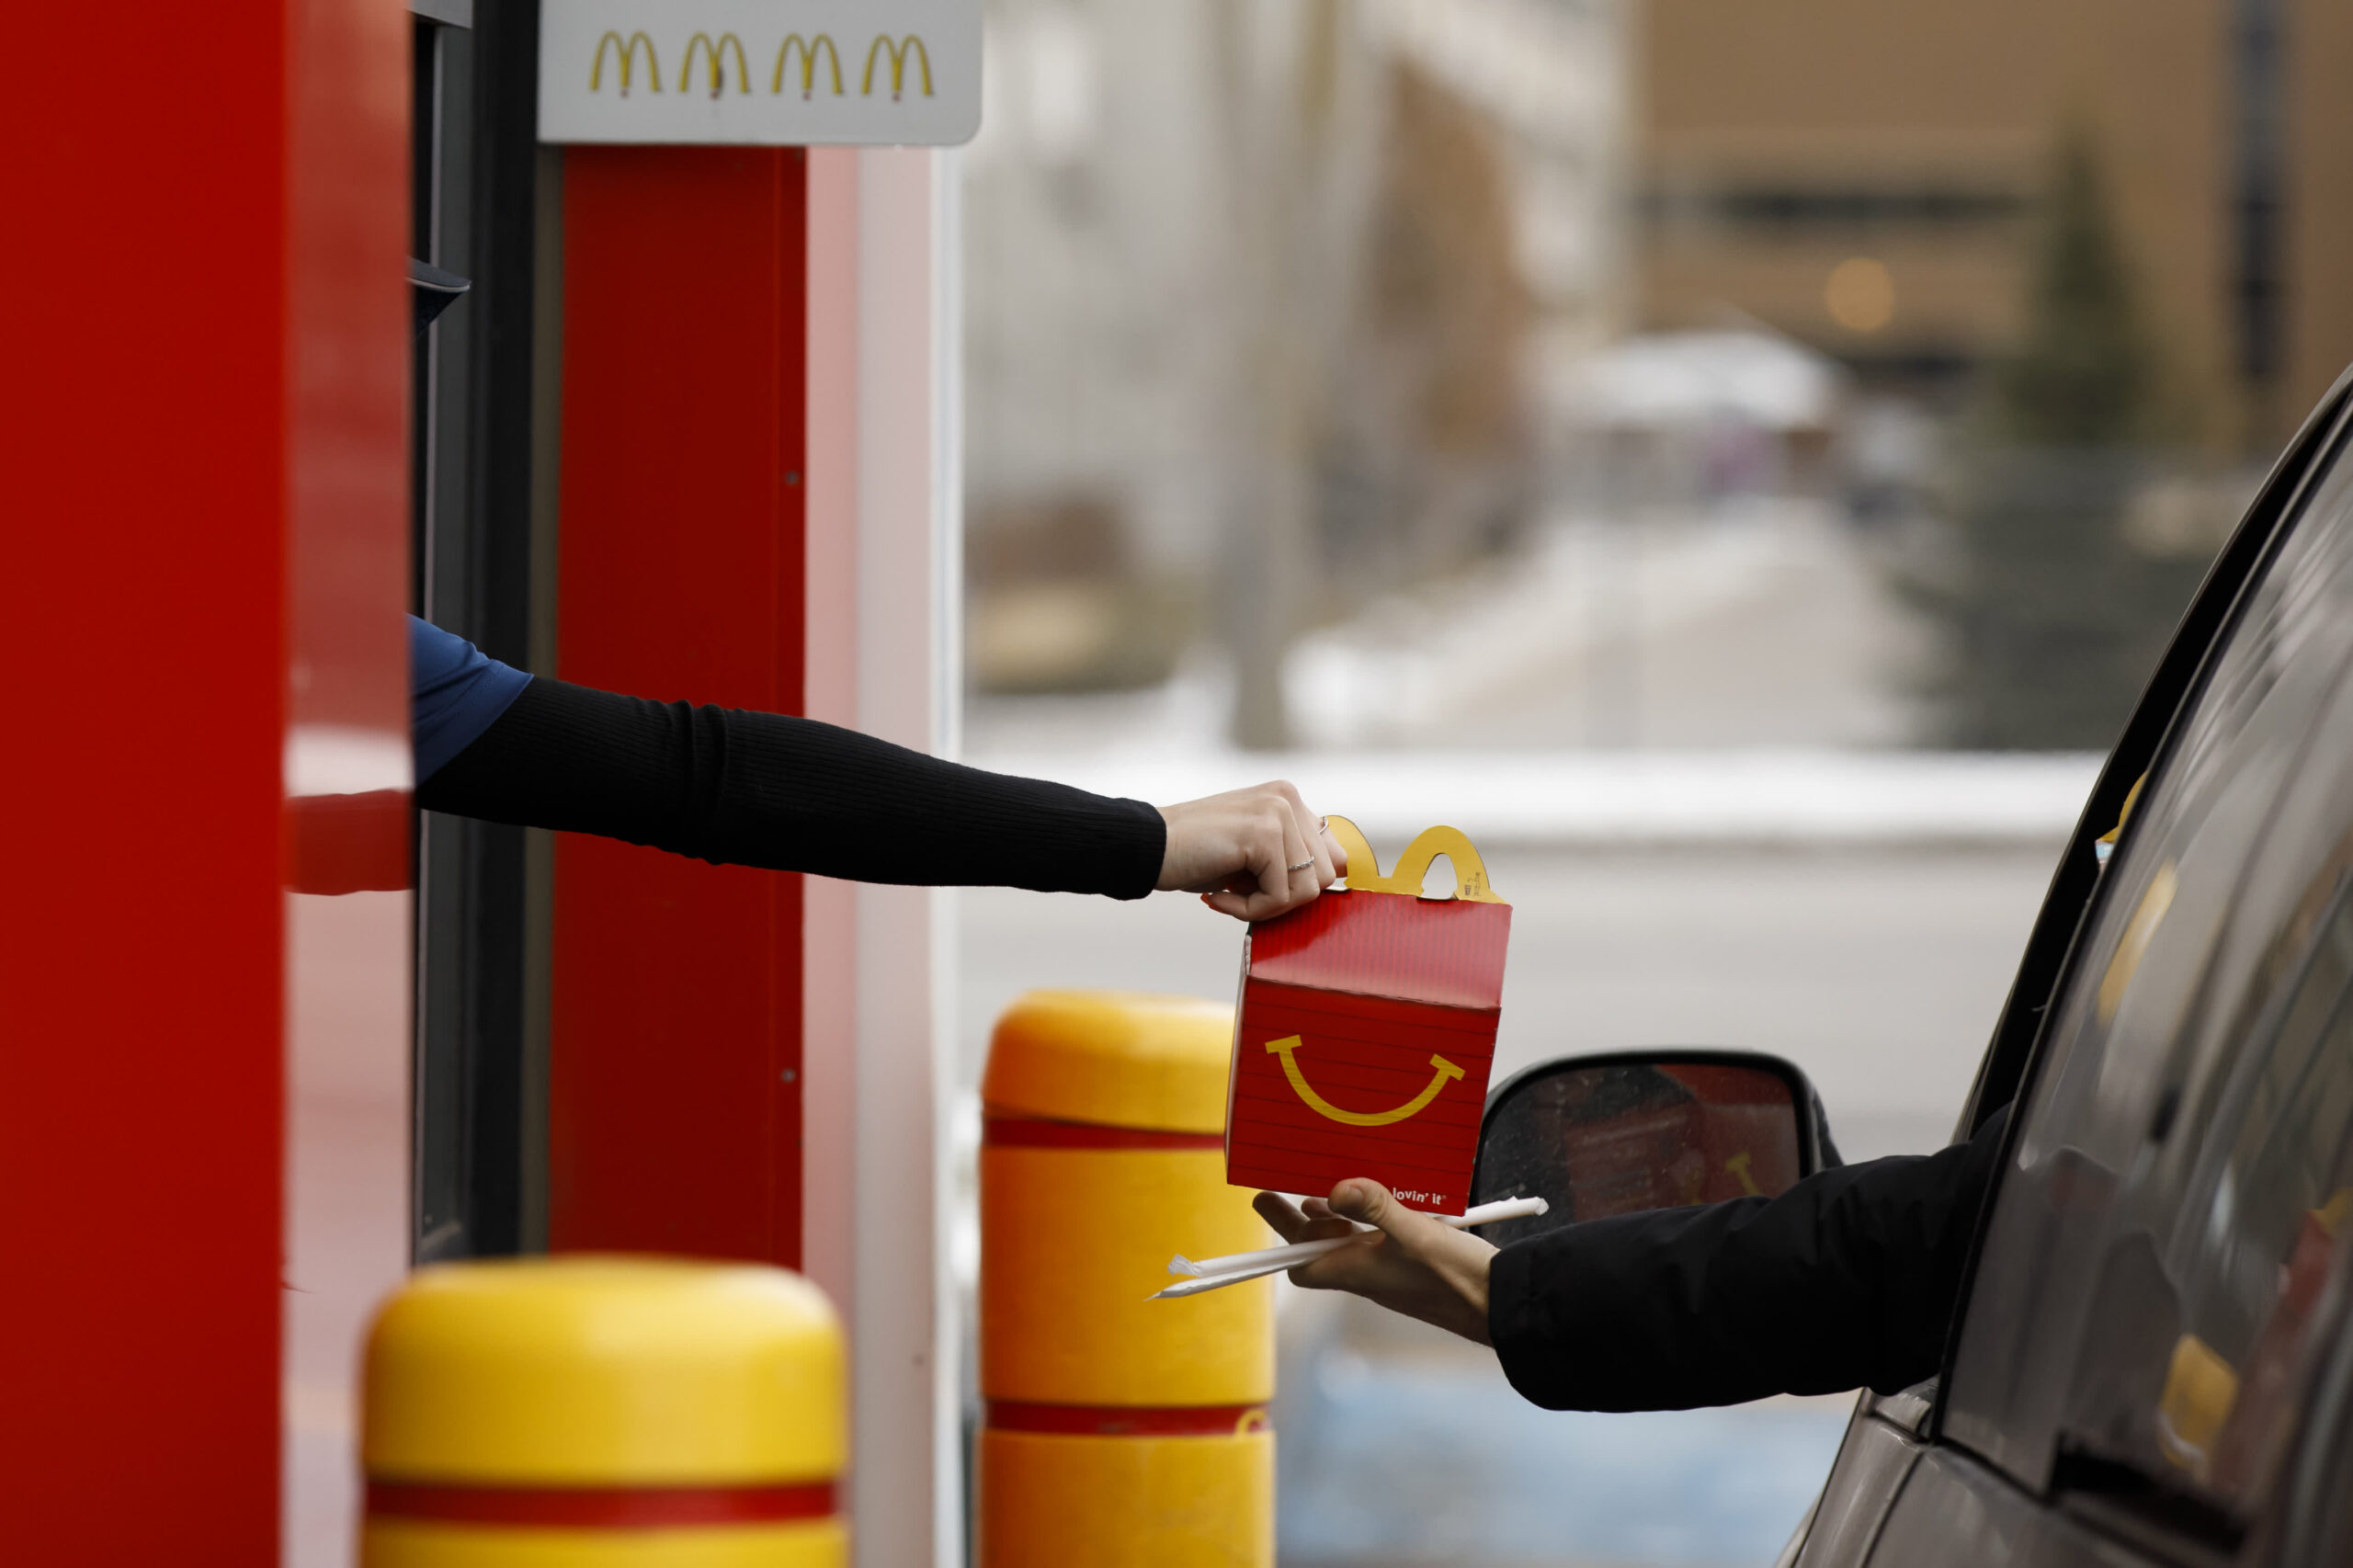 New top job at McDonald’s that’s all about understanding the customer 